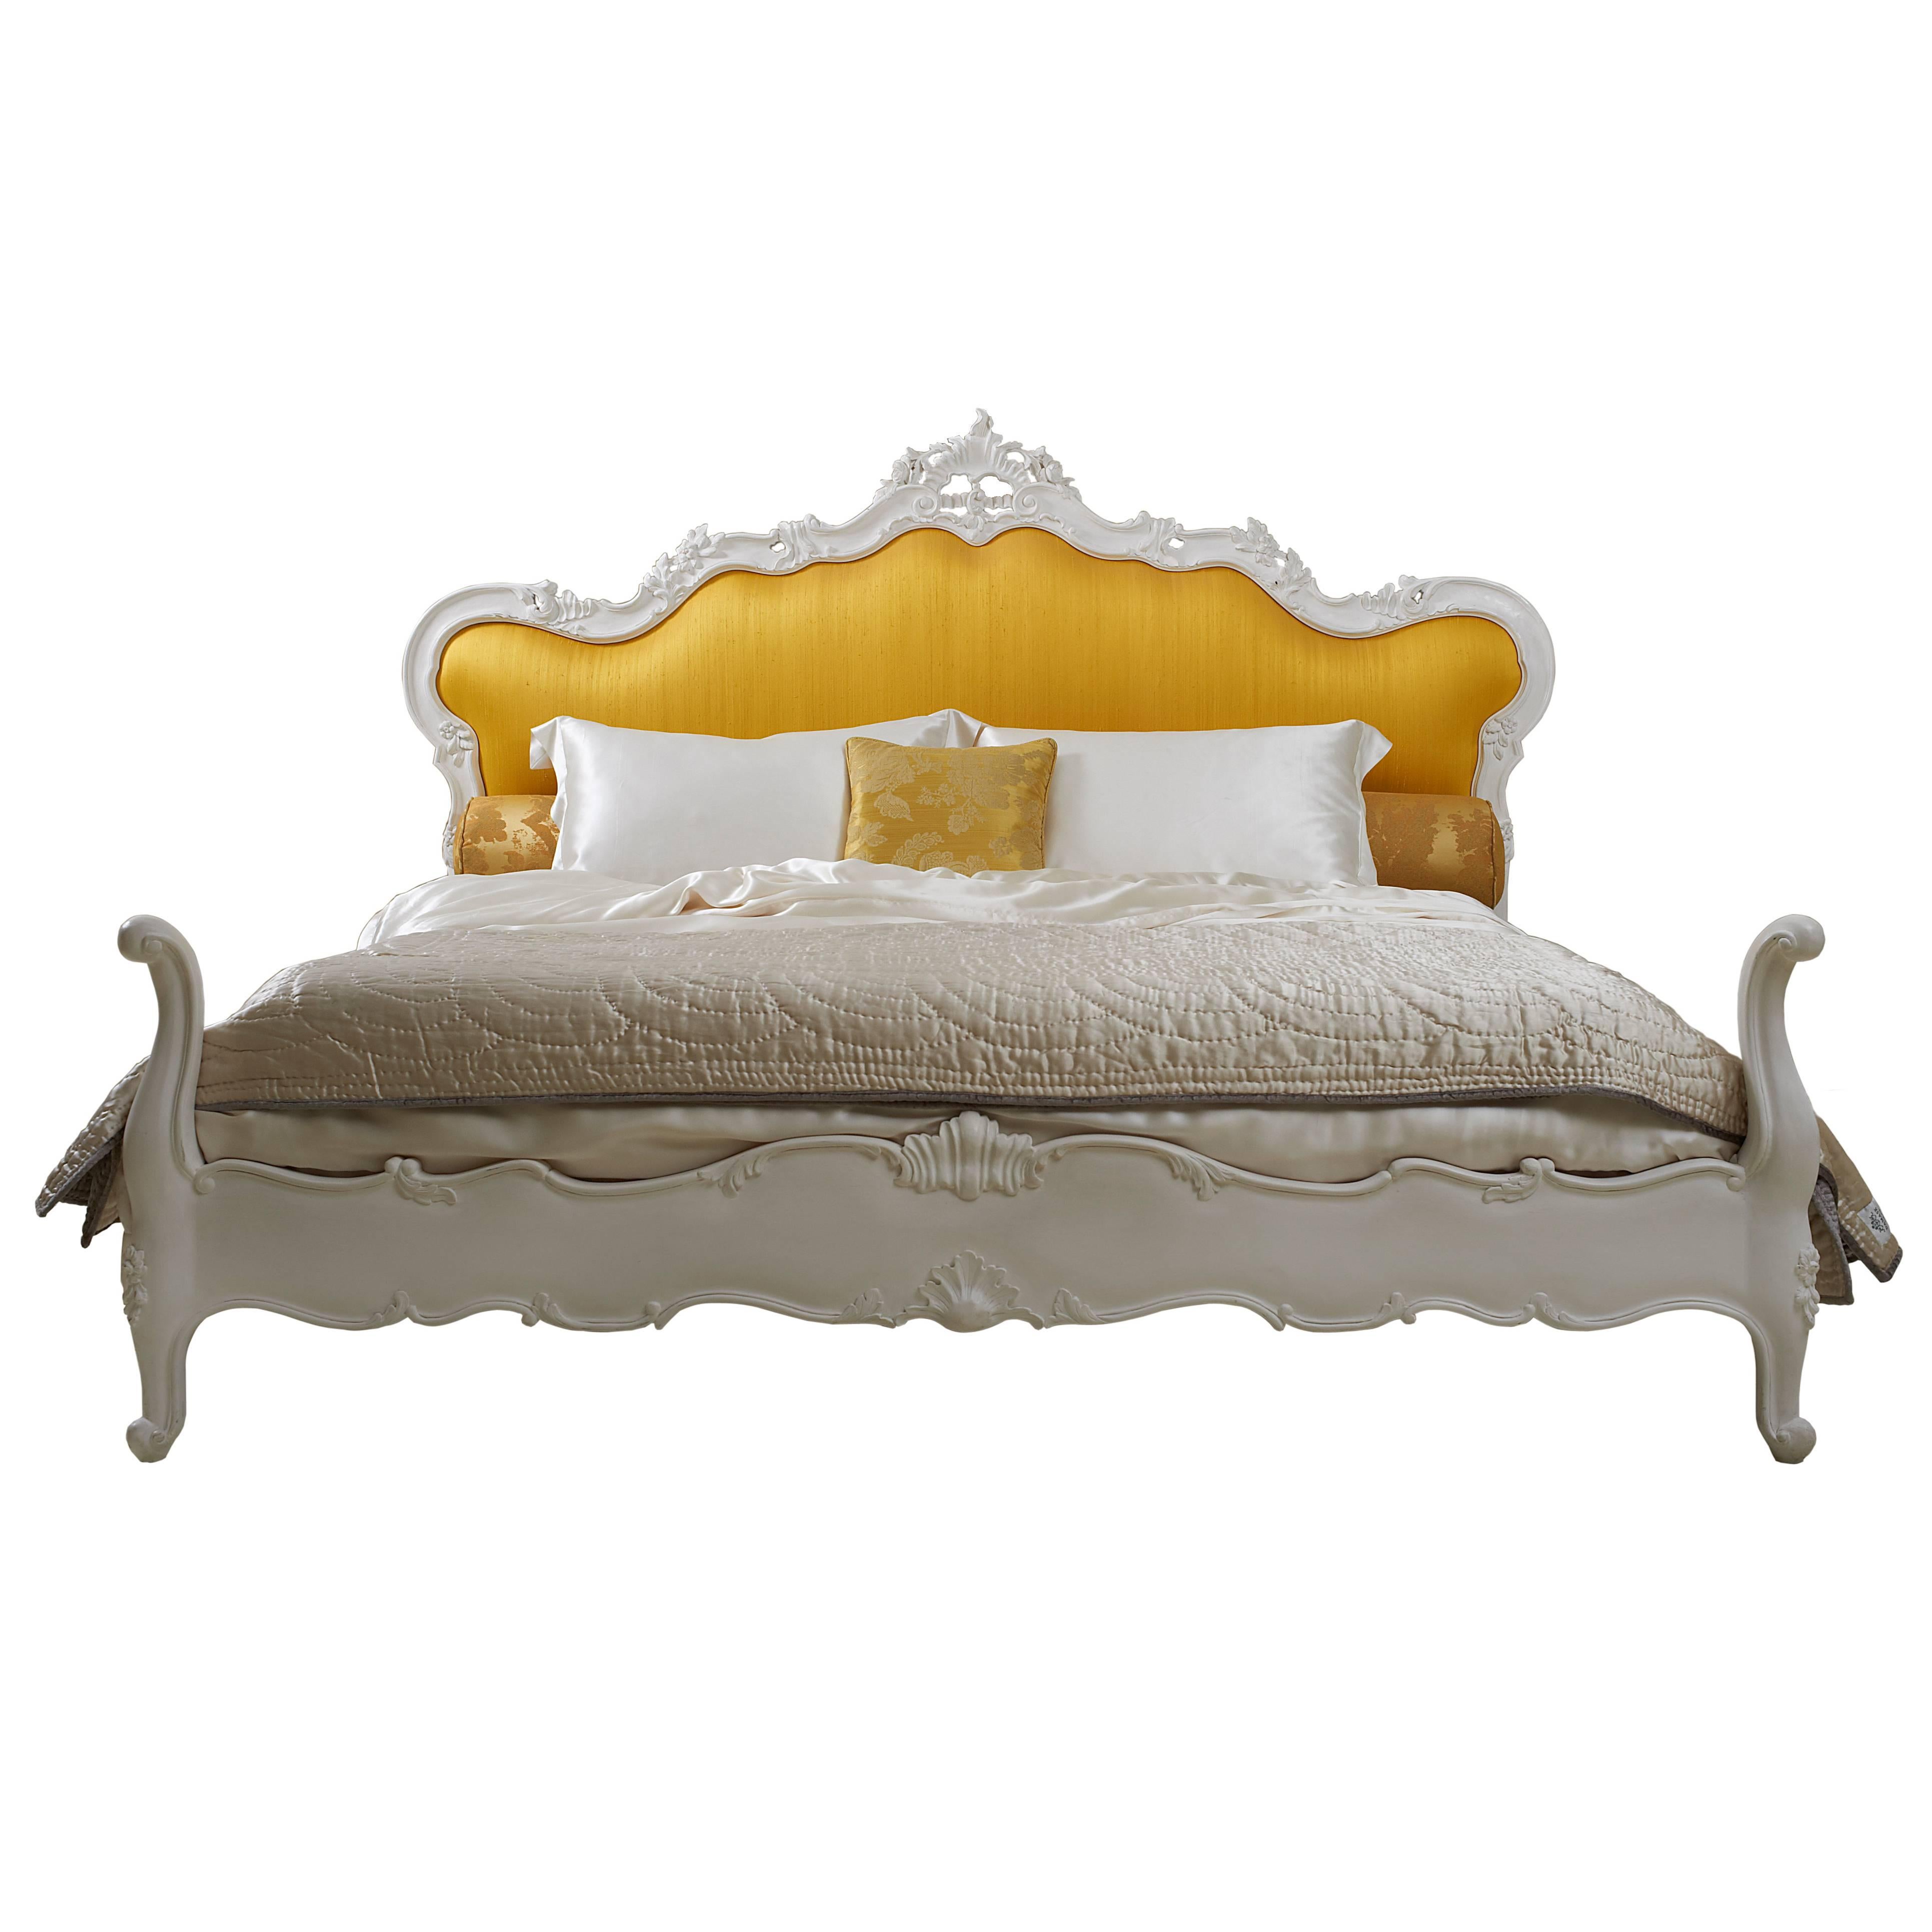 The Parisienne Bed, Hand Carved Louis XV Style Made By La Maison London